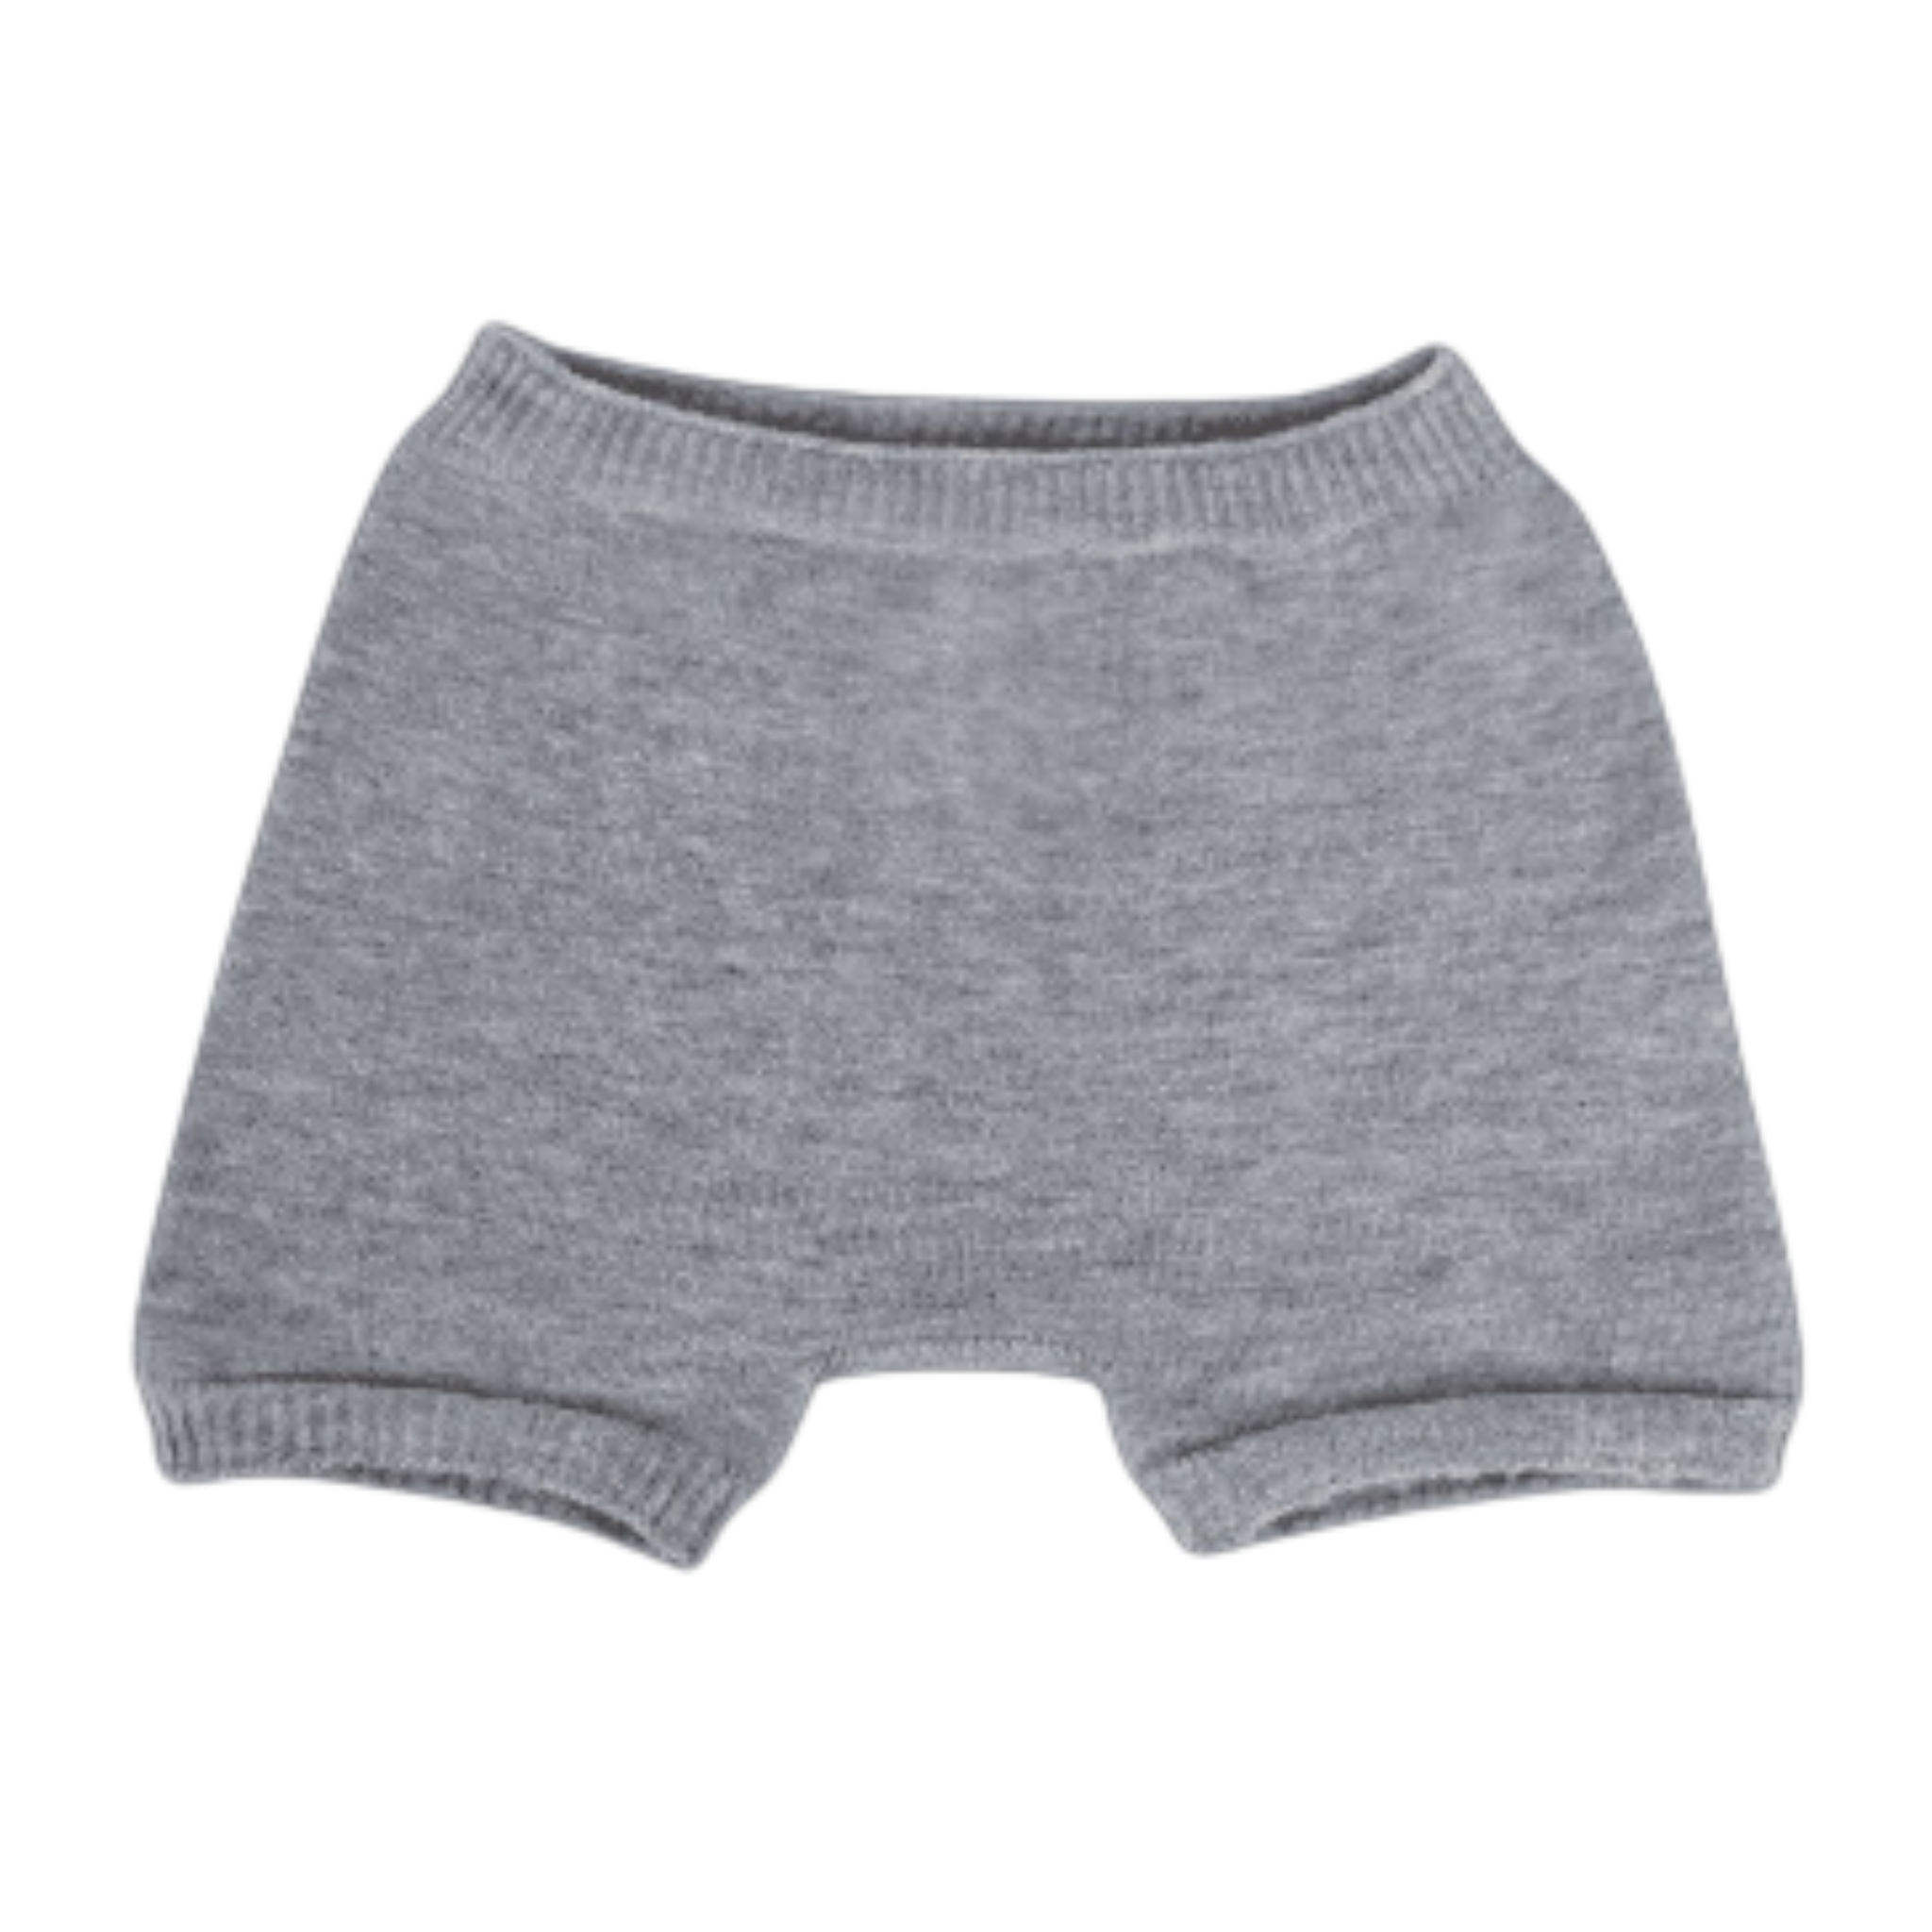 SmartKnitKIDS - Seamless Undies for Boys - Boxer Briefs